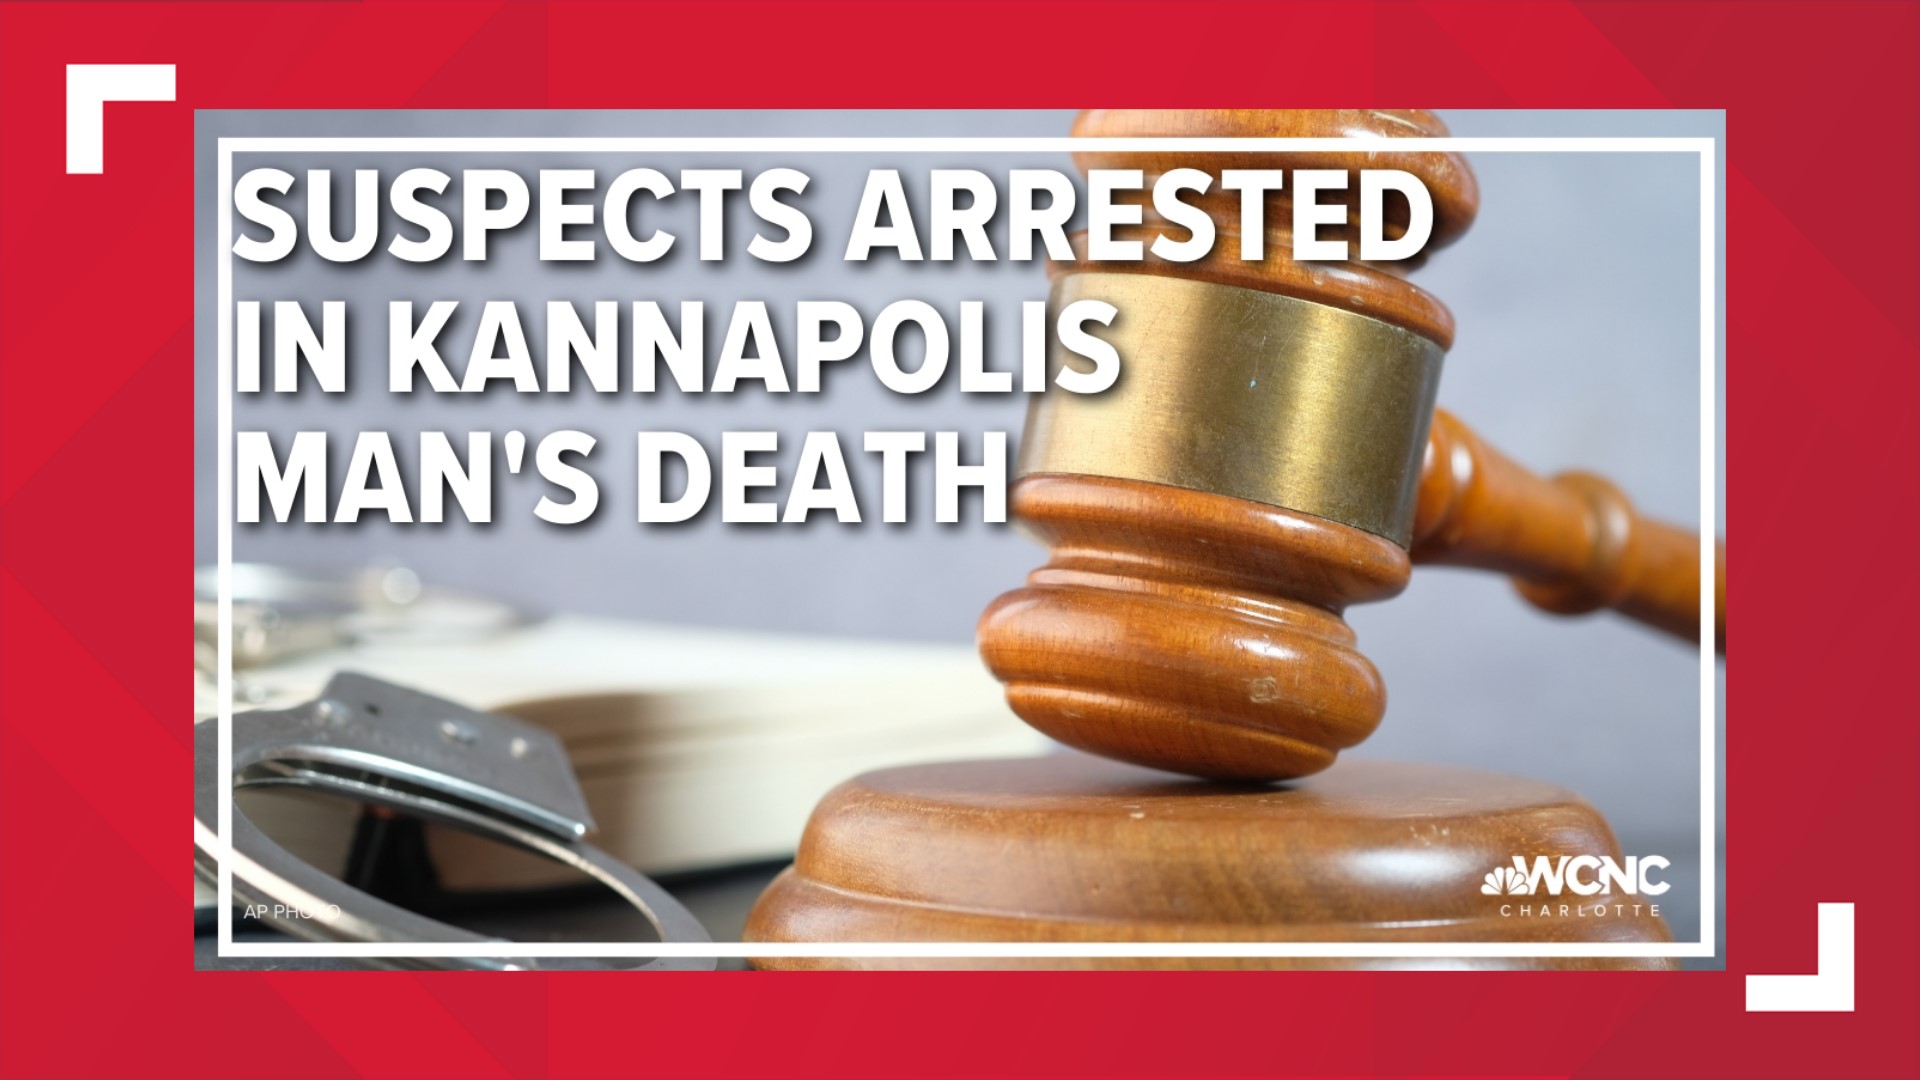 Khalil Chapman and Jennifer Chanthaboun turned themselves in to the Kannapolis Police Department early Monday morning.